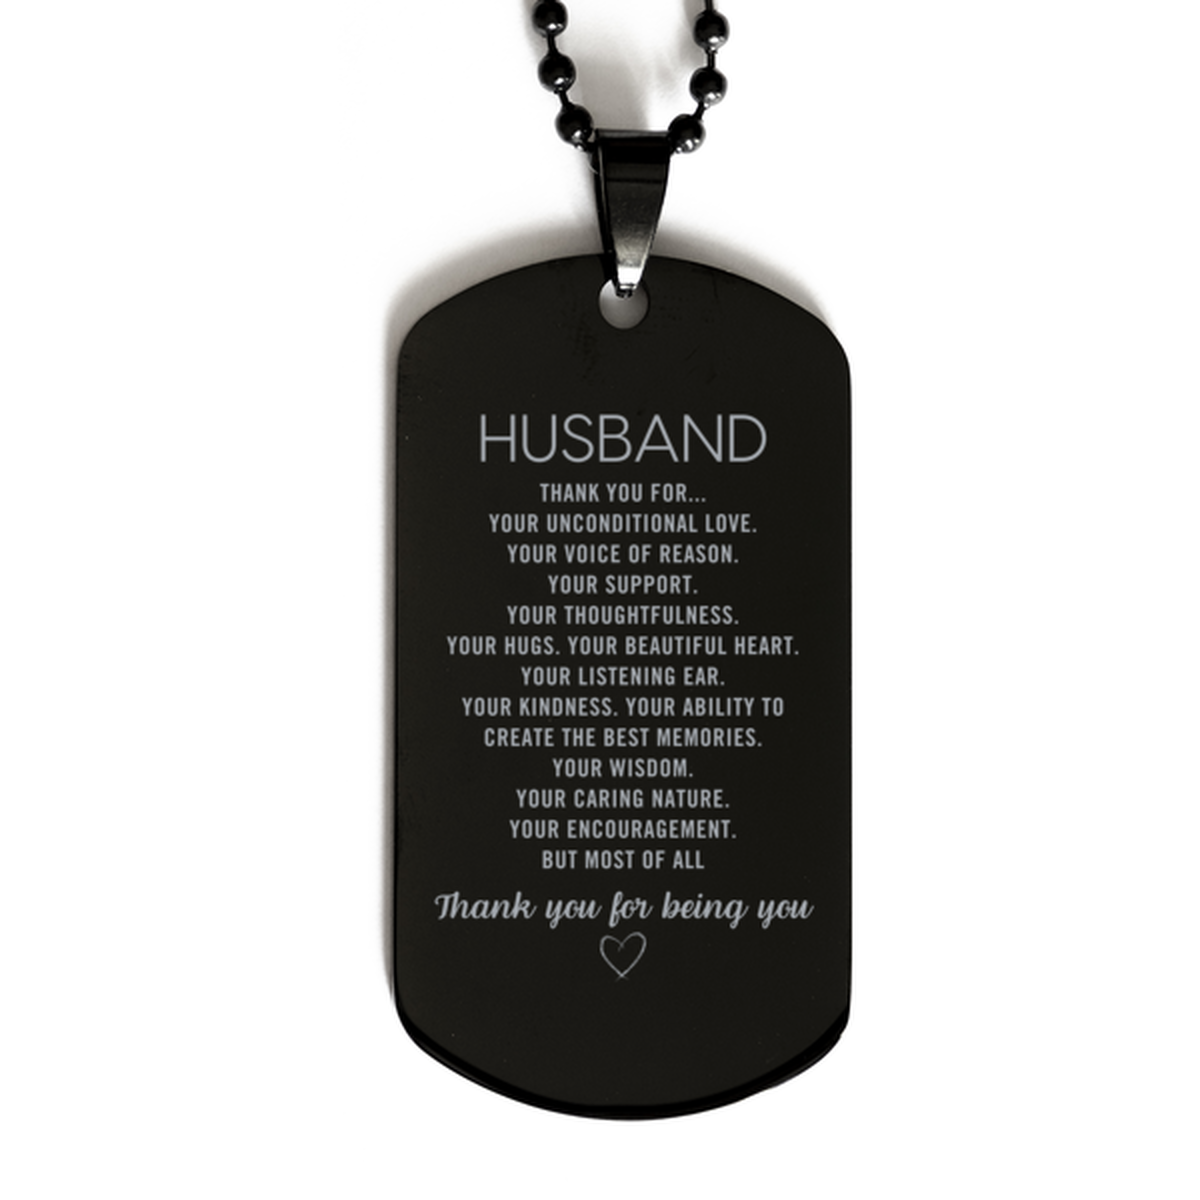 Husband Black Dog Tag Custom, Engraved Gifts For Husband Christmas Graduation Birthday Gifts for Men Women Husband Thank you for Your unconditional love